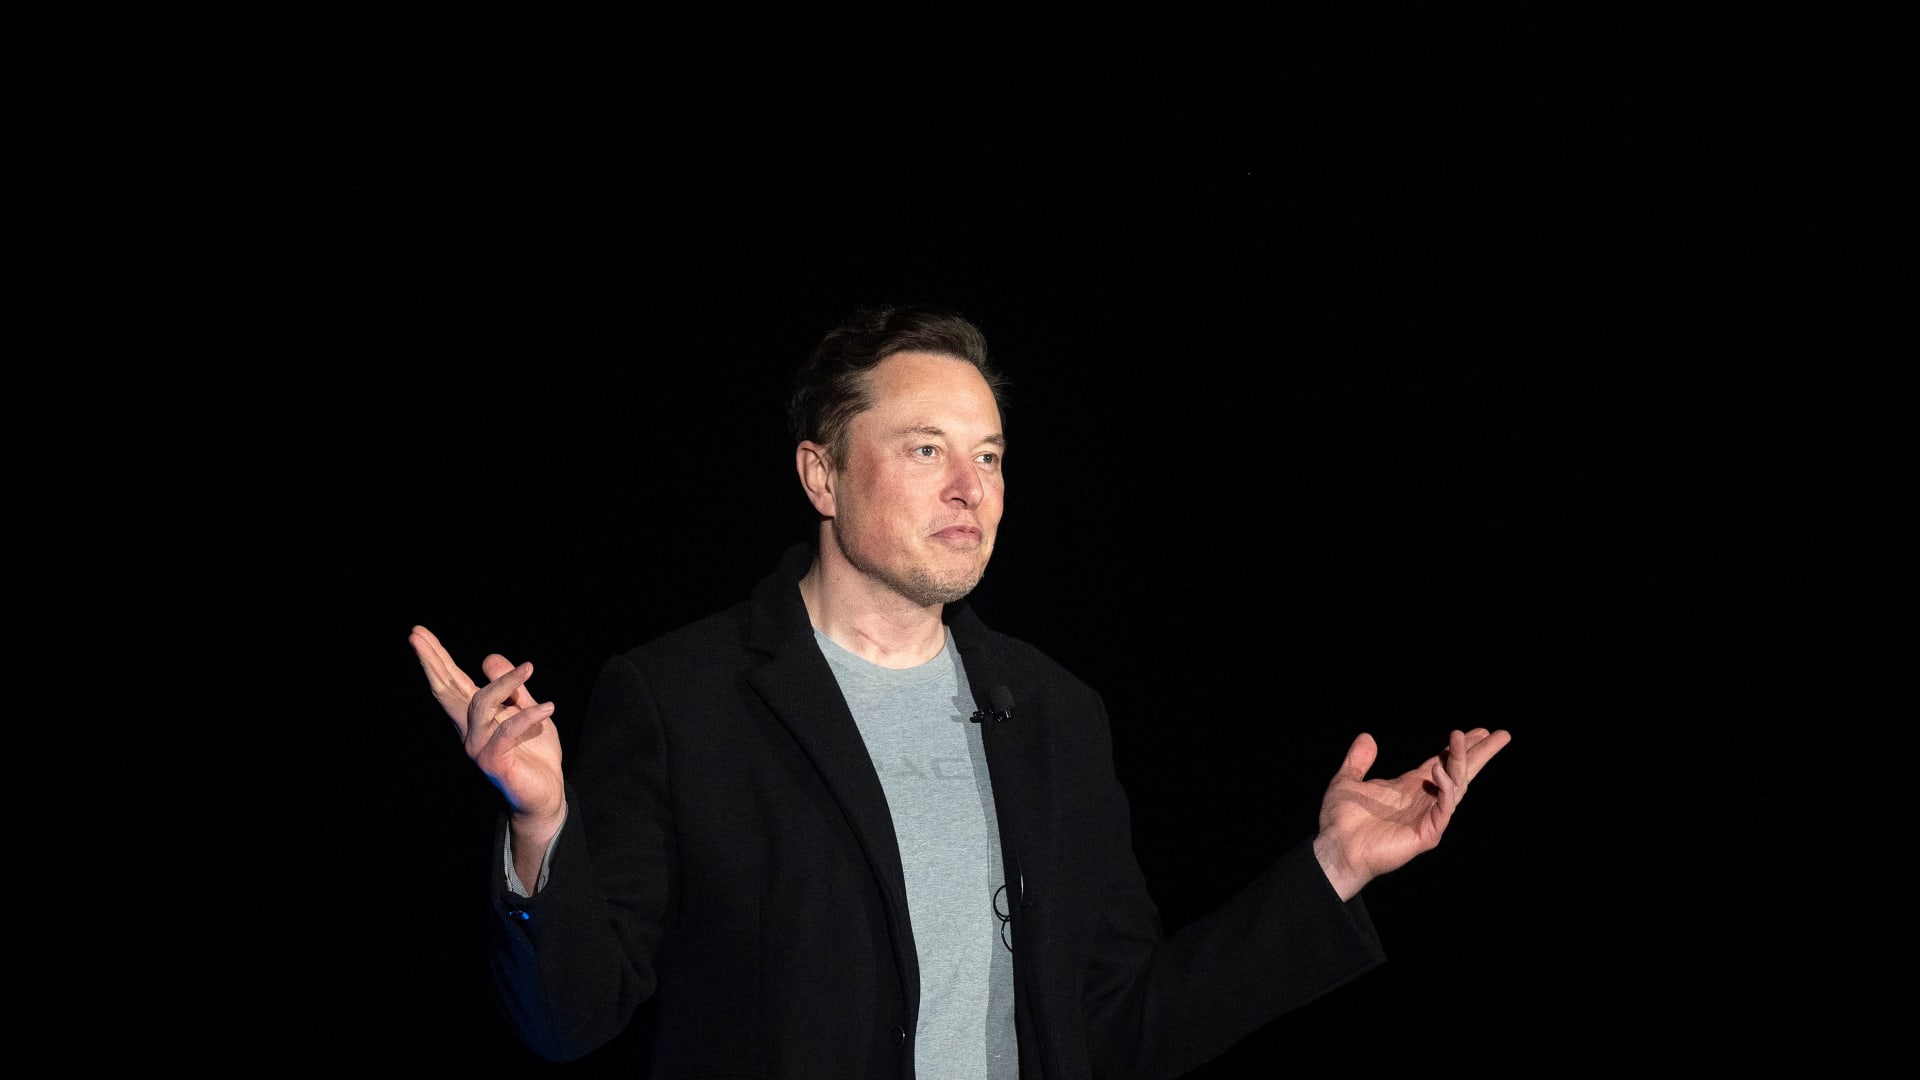 ‘The most dumb thing’: Elon Musk dismisses hydrogen as tool for energy storage